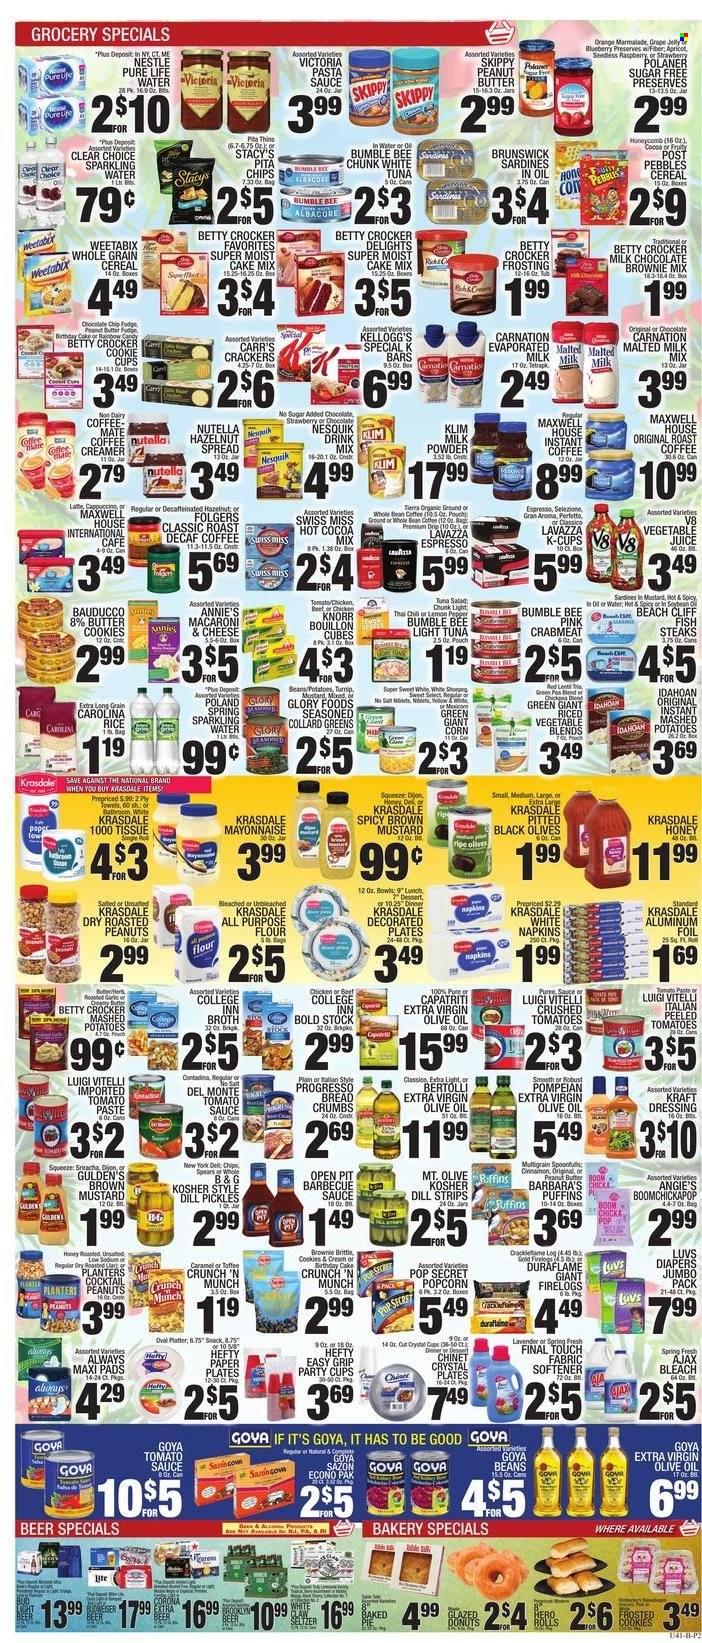 thumbnail - C-Town Flyer - 12/24/2021 - 12/30/2021 - Sales products - donut, dessert, breadcrumbs, brownie mix, cake mix, corn, collard greens, turnips, crab meat, sardines, fish, fish steak, macaroni & cheese, mashed potatoes, pasta sauce, Bumble Bee, Knorr, sauce, Progresso, Annie's, Kraft®, Bertolli, ready meal, tuna salad, Nesquik, Swiss Miss, Coffee-Mate, milk powder, creamer, mayonnaise, strips, cookies, milk chocolate, Nestlé, Nutella, chocolate chips, butter cookies, crackers, Kellogg's, Candy, Brownie Brittle, bars, Thins, popcorn, pita chips, all purpose flour, bouillon, flour, frosting, broth, baking mix, crushed tomatoes, tomato paste, tomato sauce, pickles, light tuna, Goya, Del Monte, canned fish, pickled vegetables, peeled tomatoes, cereals, corn flakes, Weetabix, rice, BBQ sauce, mustard, sriracha, dressing, extra virgin olive oil, olive oil, grape jelly, hazelnut spread, marmalade, roasted peanuts, peanuts, Planters, juice, vegetable juice, seltzer water, sparkling water, hot cocoa, Maxwell House, instant coffee, coffee beans, Folgers, coffee capsules, K-Cups, Lavazza, beer, Corona Extra, steak. Page 2.